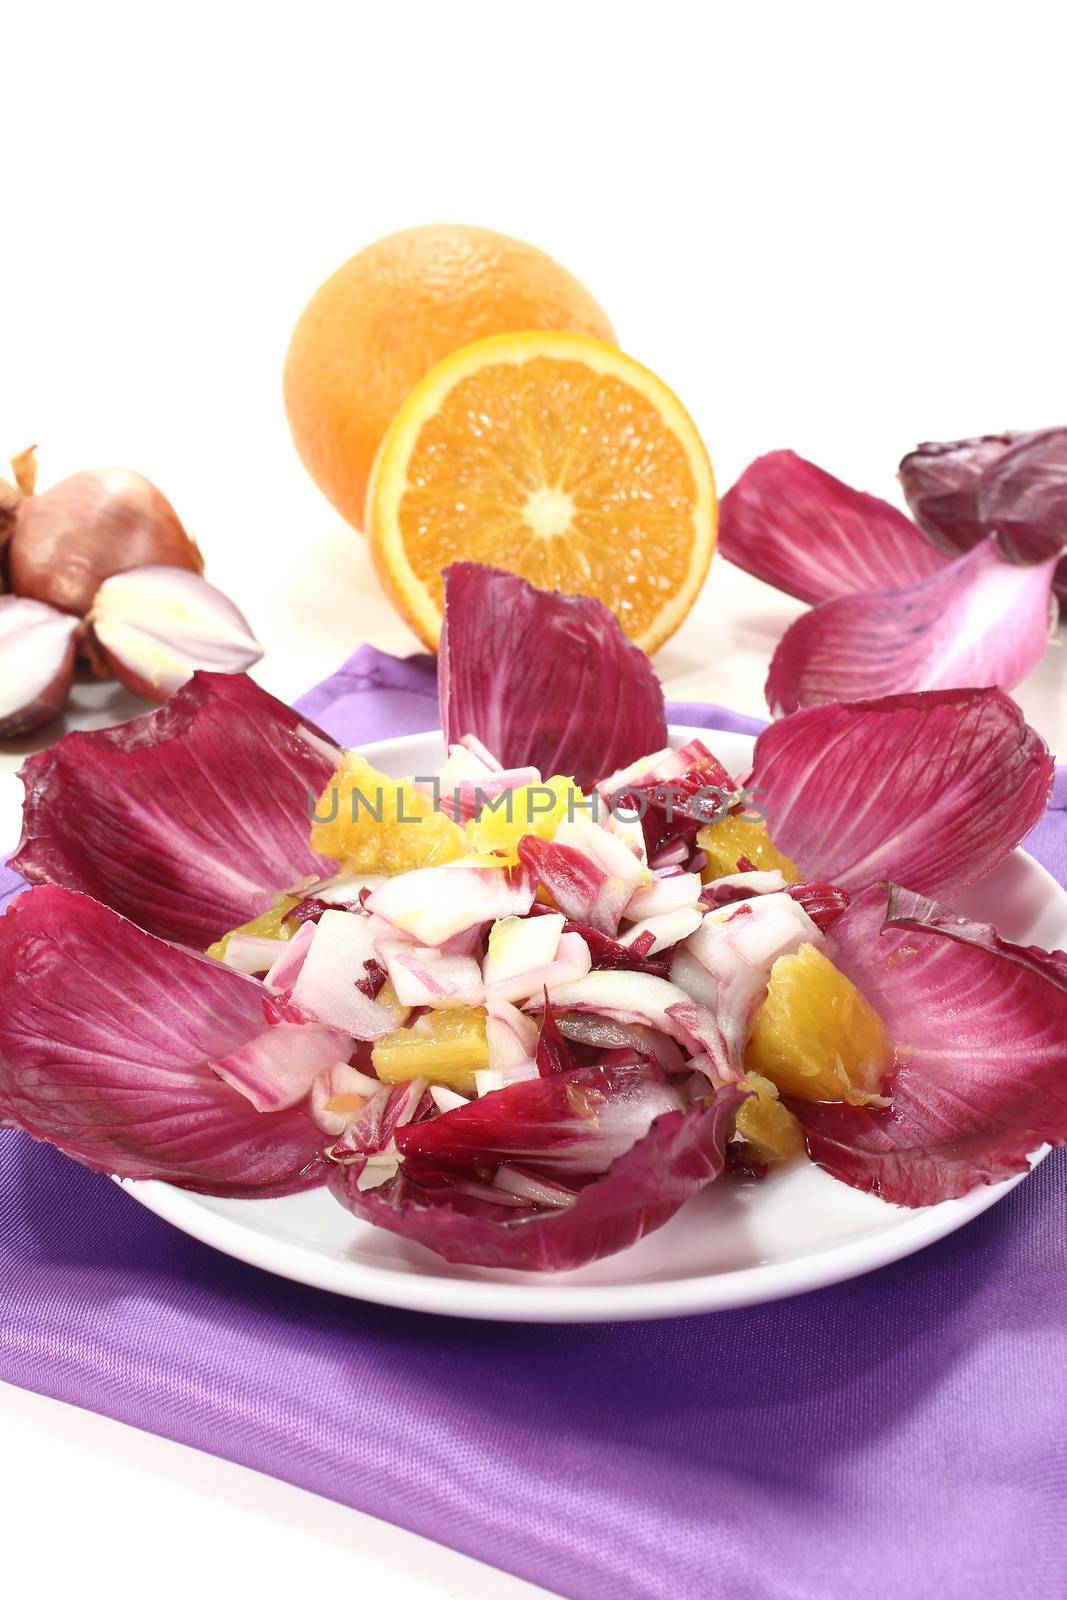 chicory salad with orange slices by discovery